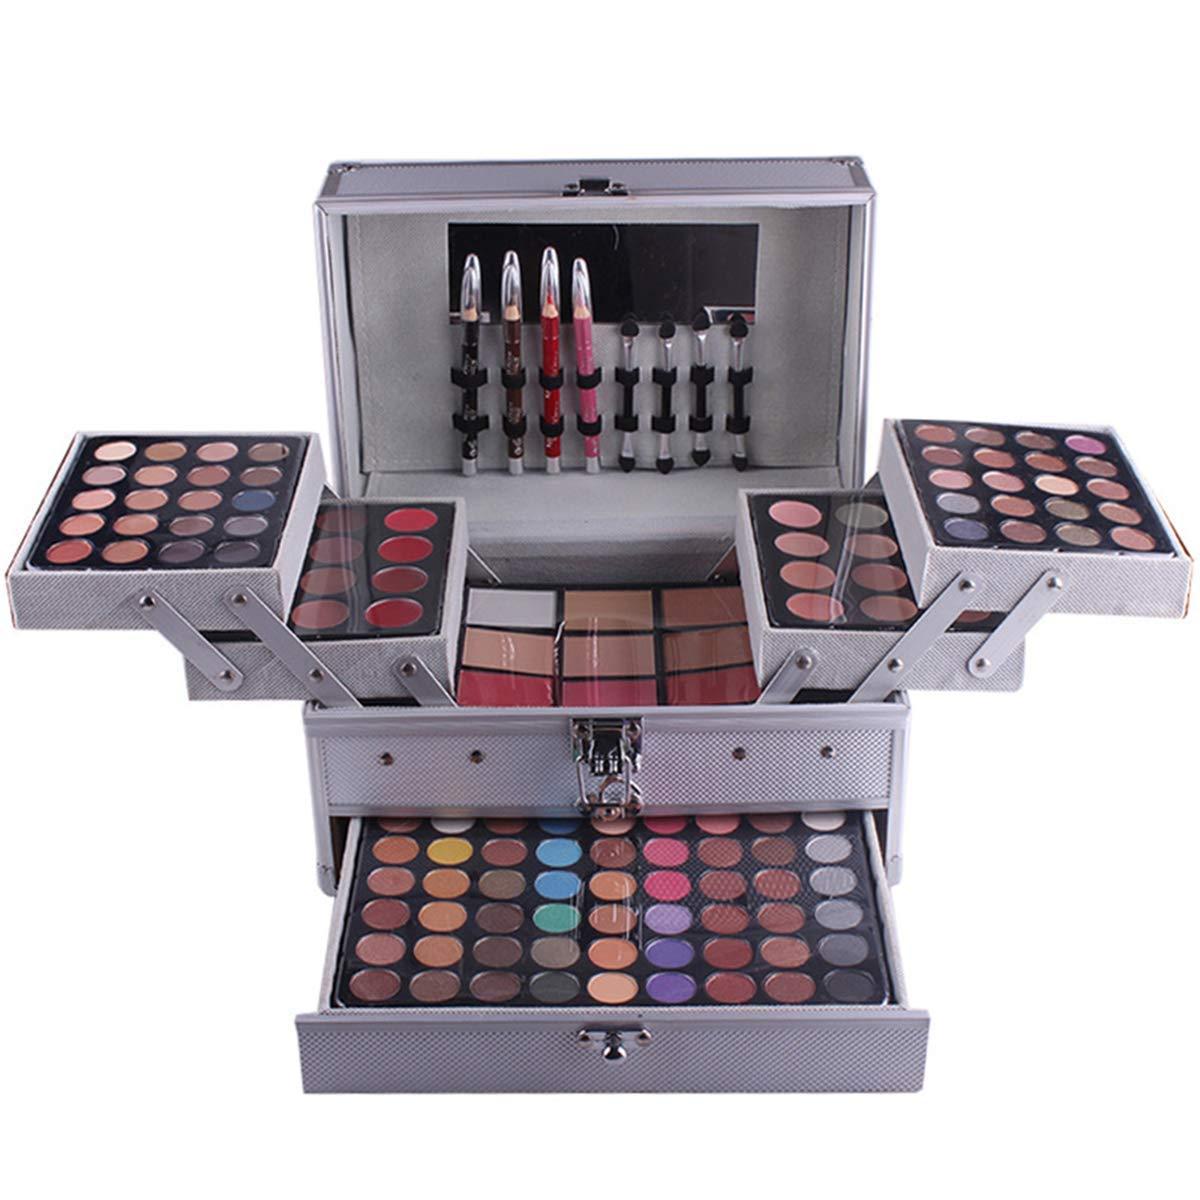 Pure Vie All-in-One Holiday Gift Makeup Set Essential Starter Bundle  Include Eyeshadow Palette Lipgloss Concealer Blush Eyebrow Foundation Face  Powder Eyeliner Pencil - Make up Kit for Women Full Kit